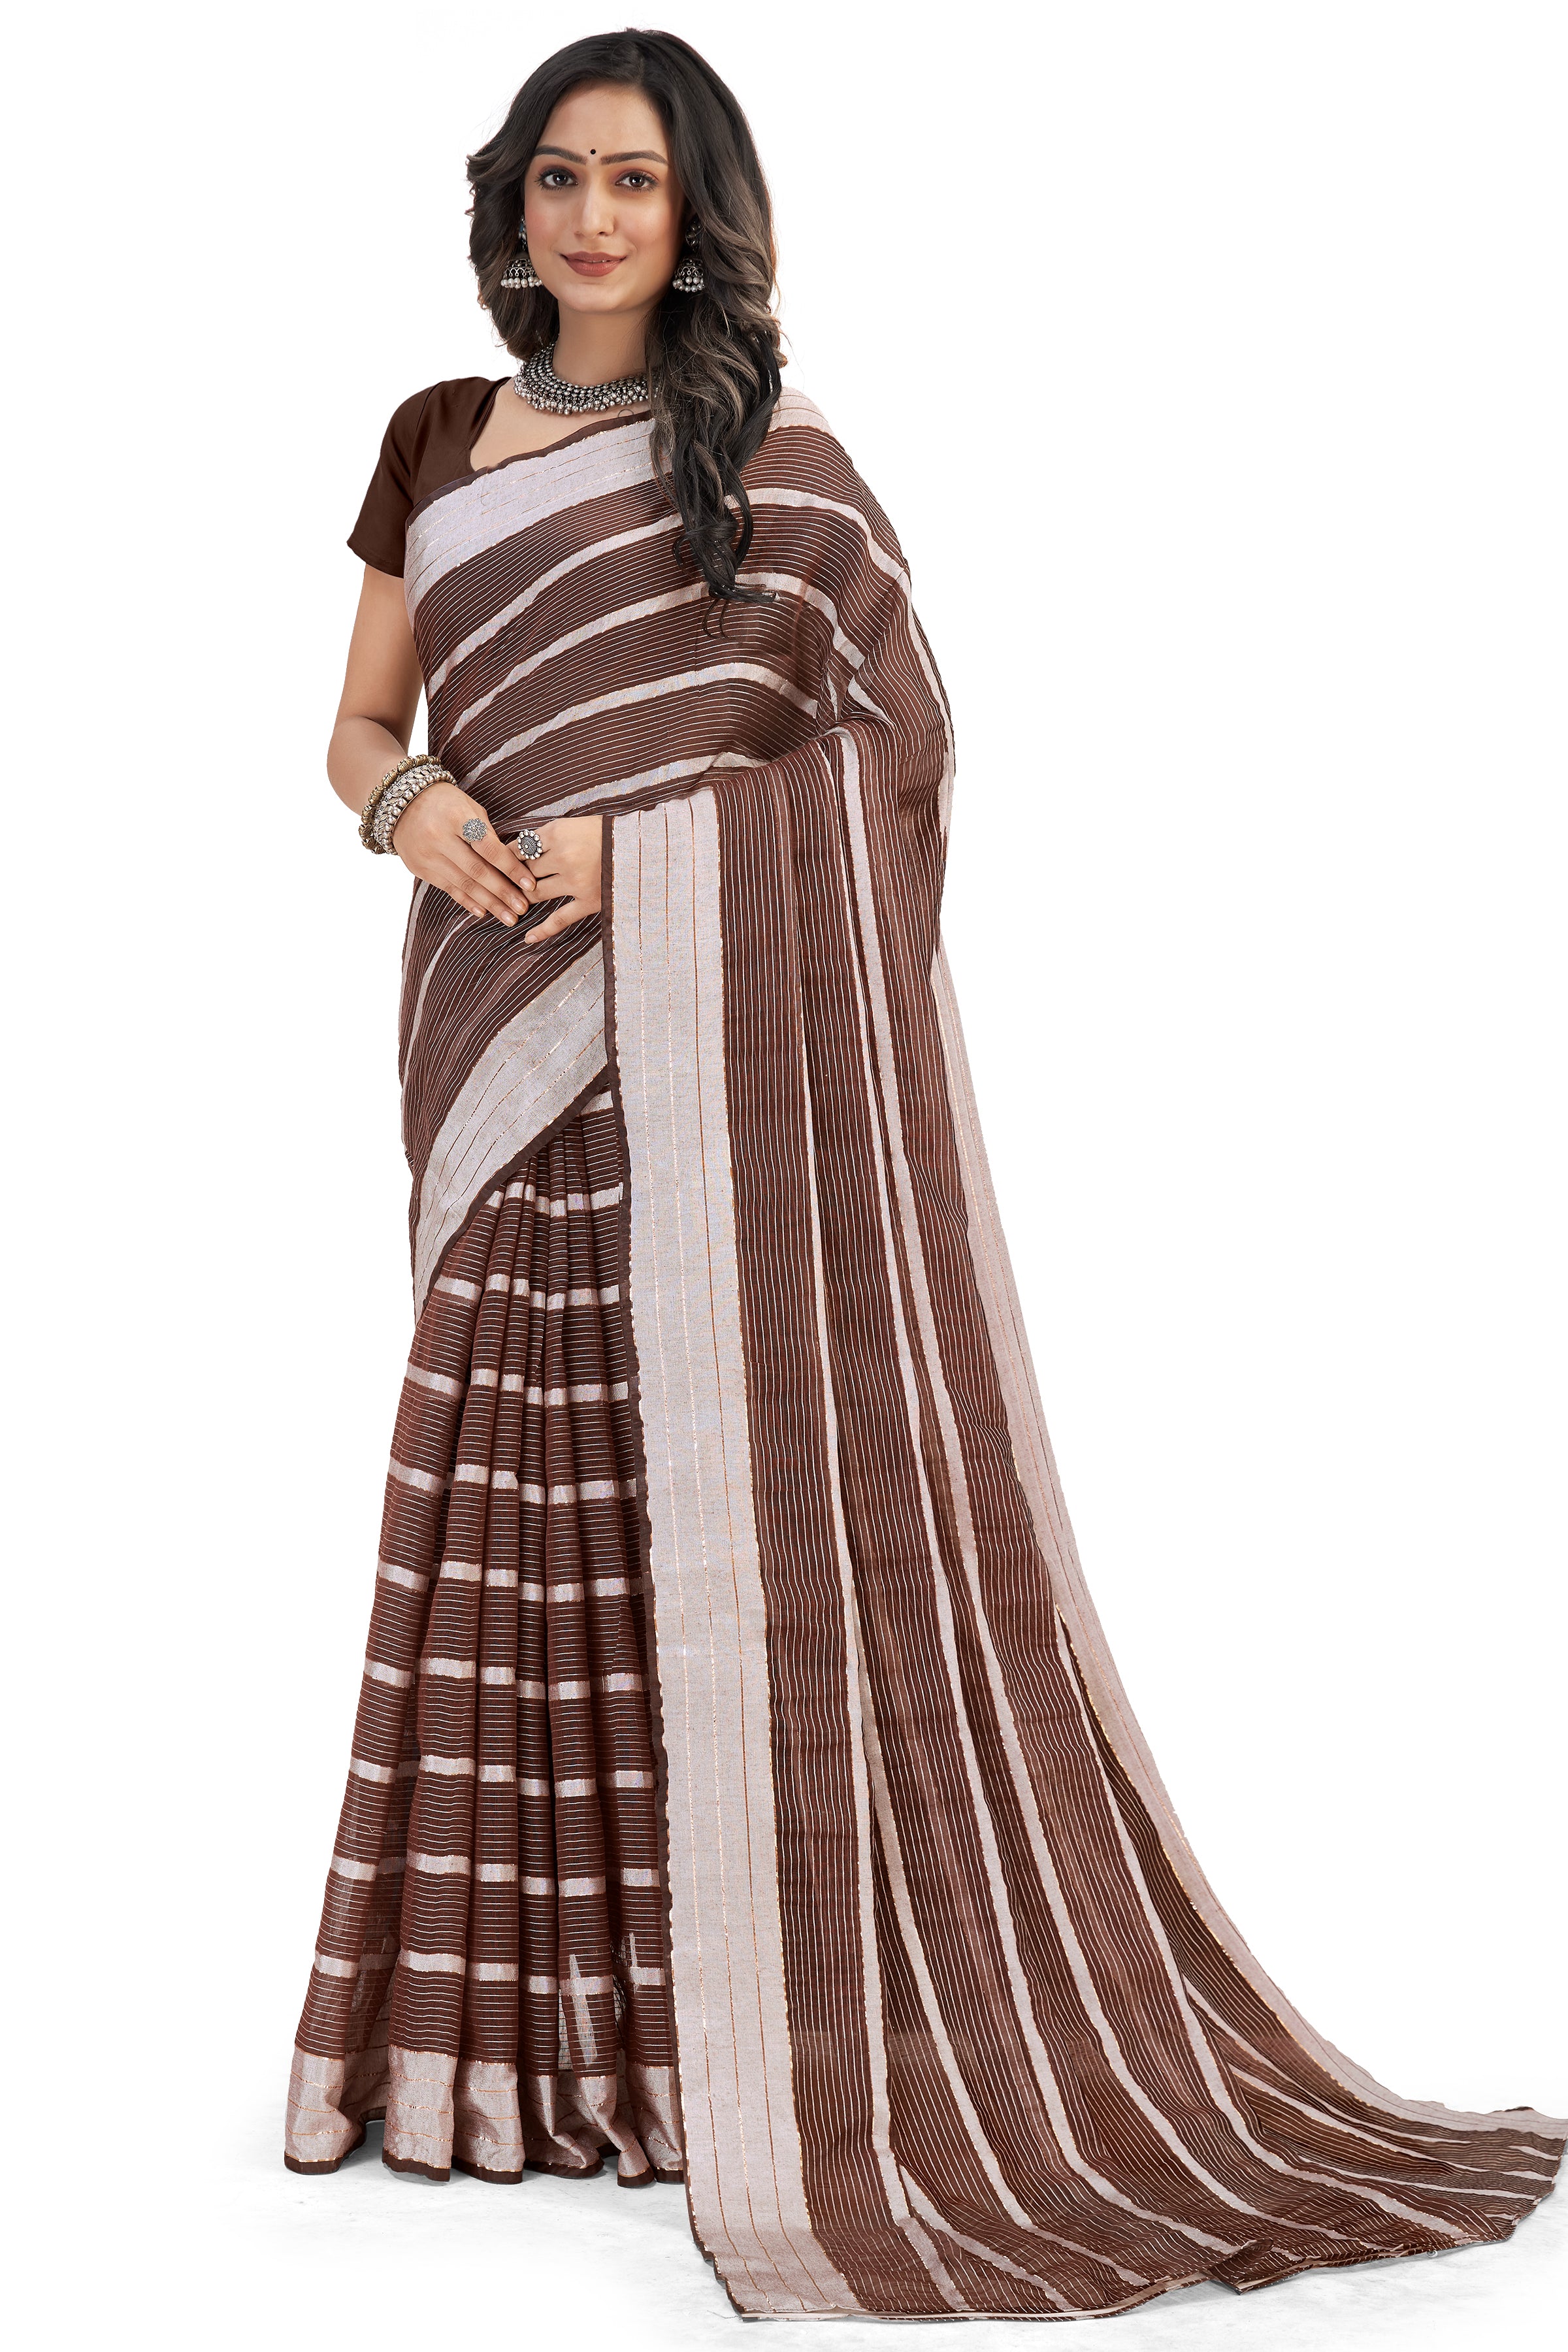 Women's Solid Self woven Striped Daily Wear Formal Cotton Bleand Saree With Blouse Piece (Coffee Brown) - NIMIDHYA